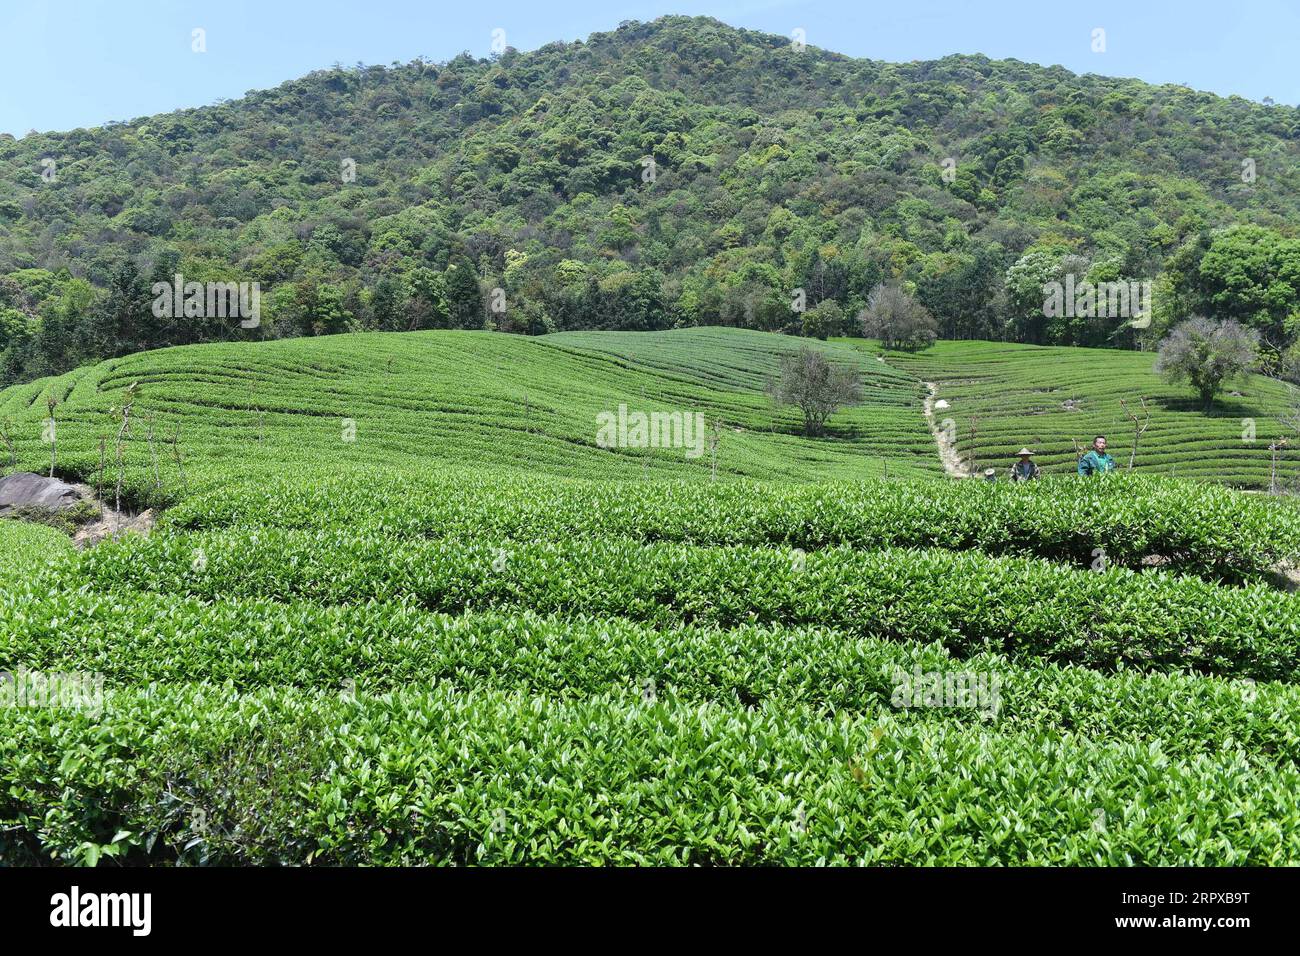 https://c8.alamy.com/comp/2RPXB9T/200515-fuzhou-may-15-2020-photo-shows-the-view-of-a-tea-garden-in-xingtian-township-of-wuyishan-city-in-nanping-southeast-china-s-fujian-province-april-17-2020-nanping-city-has-endeavored-to-develop-green-industries-in-multiple-sectors-such-as-agriculture-tourism-and-culture-to-translate-its-ecological-advantatges-into-the-driving-force-of-economic-development-china-fujian-green-industries-cn-linxshanchuan-publicationxnotxinxchn-2RPXB9T.jpg